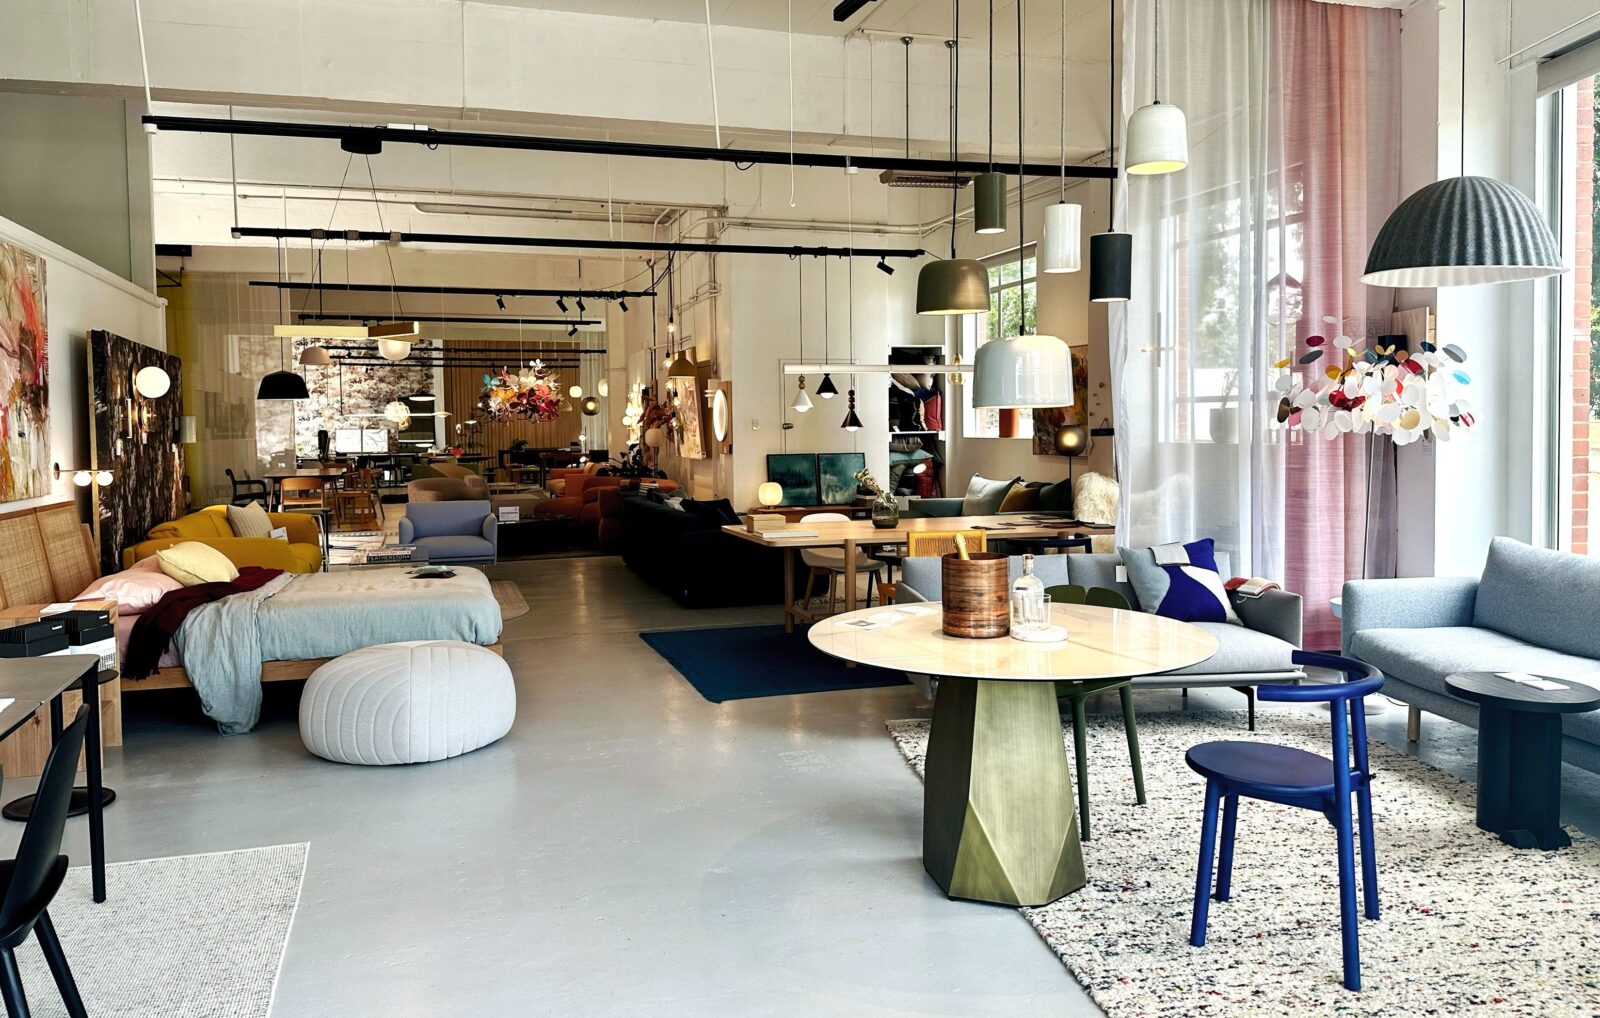 Image of Miko showroom, featuting furniture, lighting and rugs.